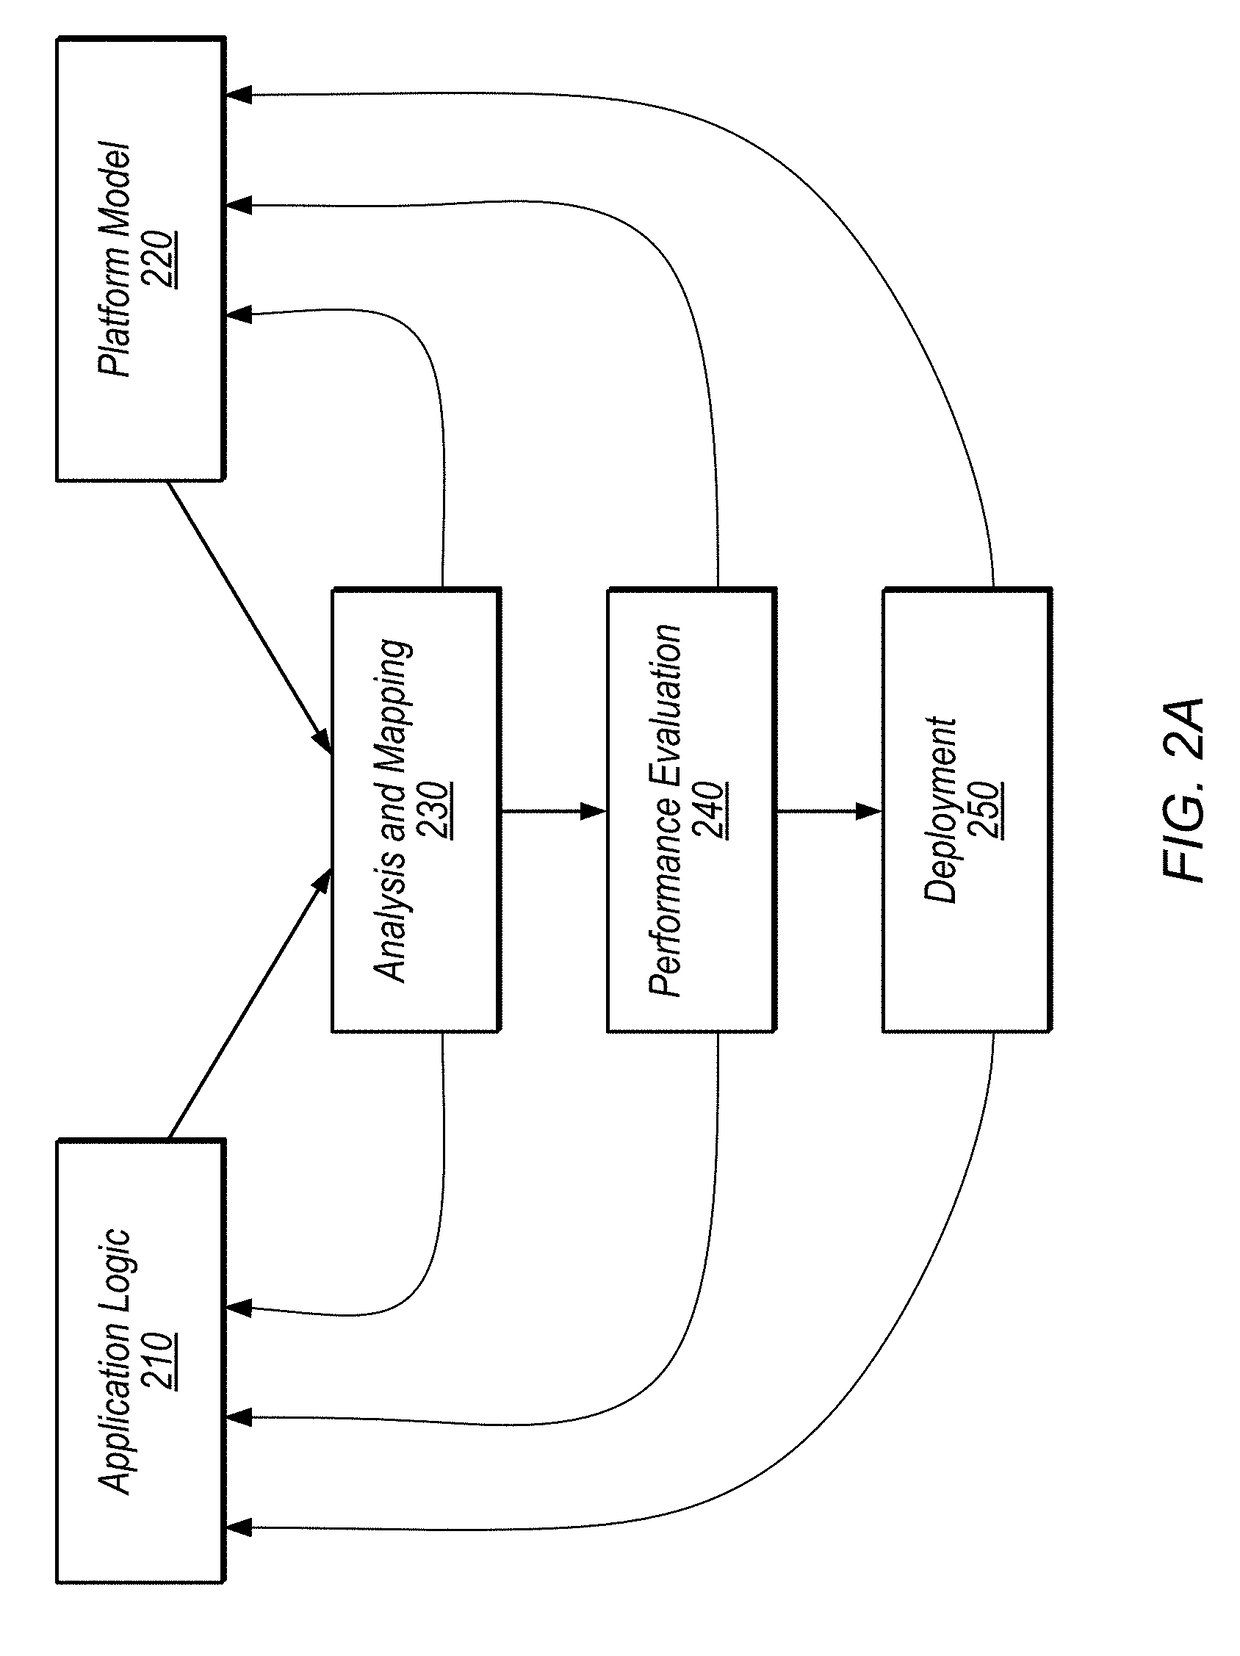 Automatically Mapping Program Functions to Distributed Heterogeneous Platforms Based on Hardware Attributes and Specified Constraints